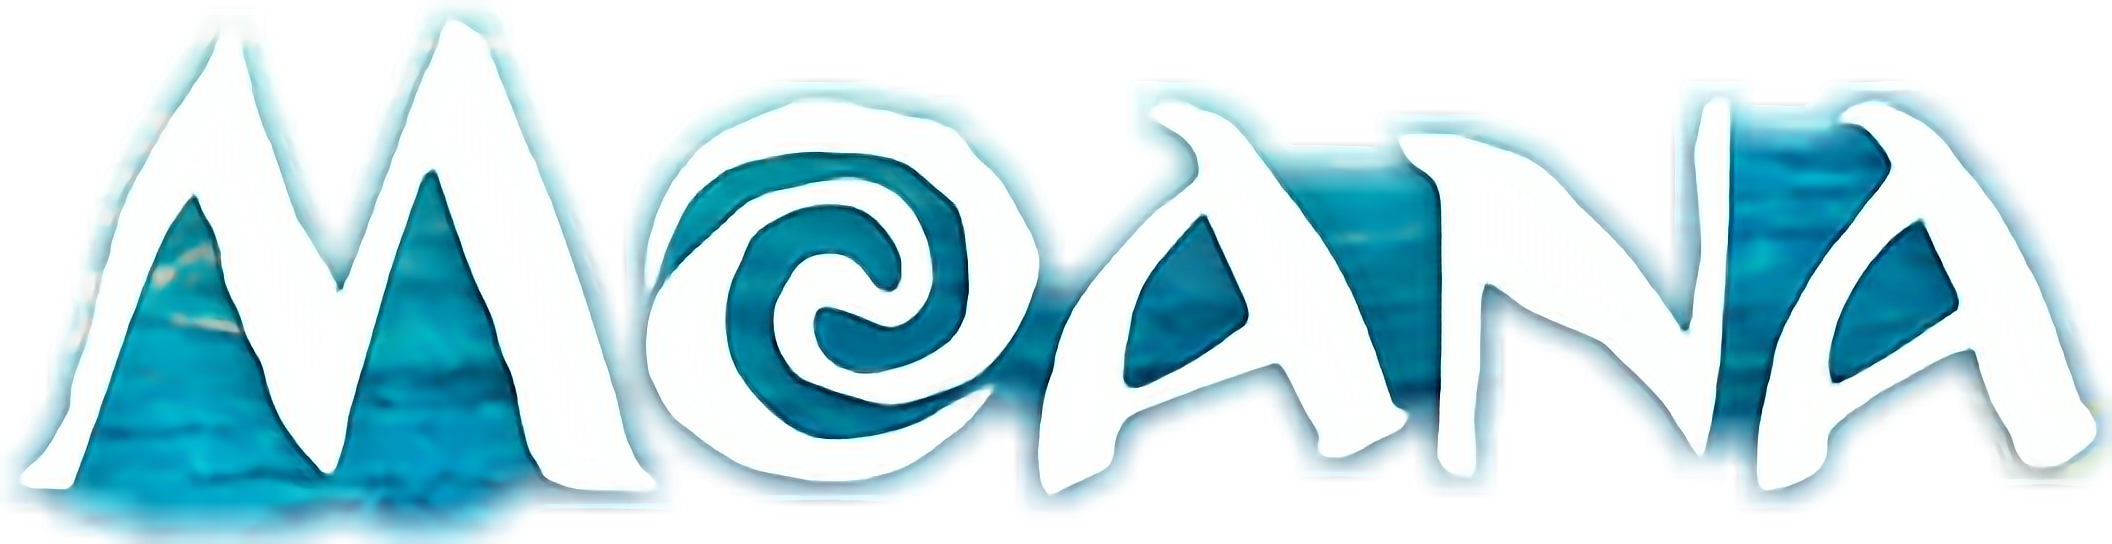 Moana Movie Title Graphic PNG image